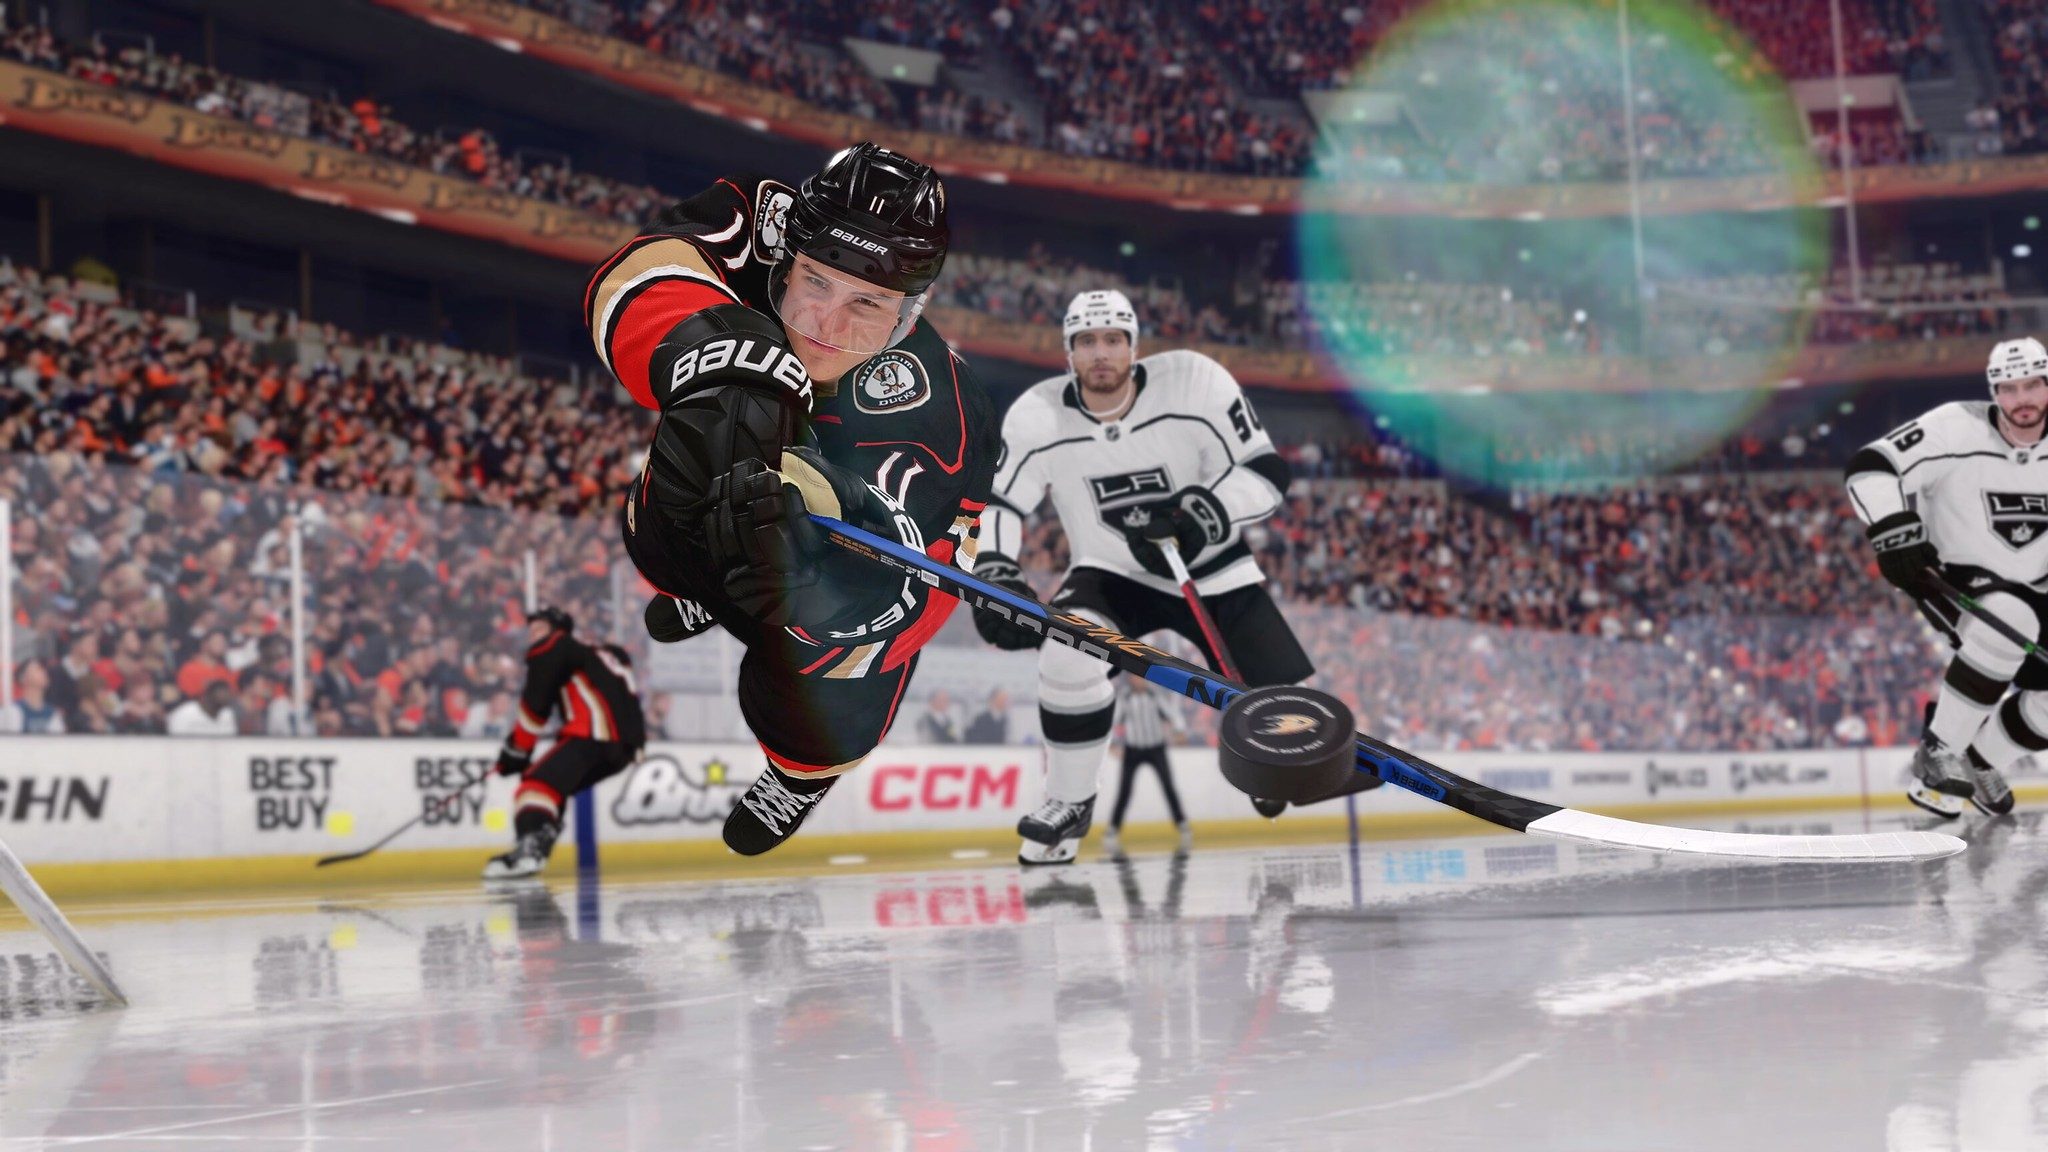 NHL 14 for PlayStation 3